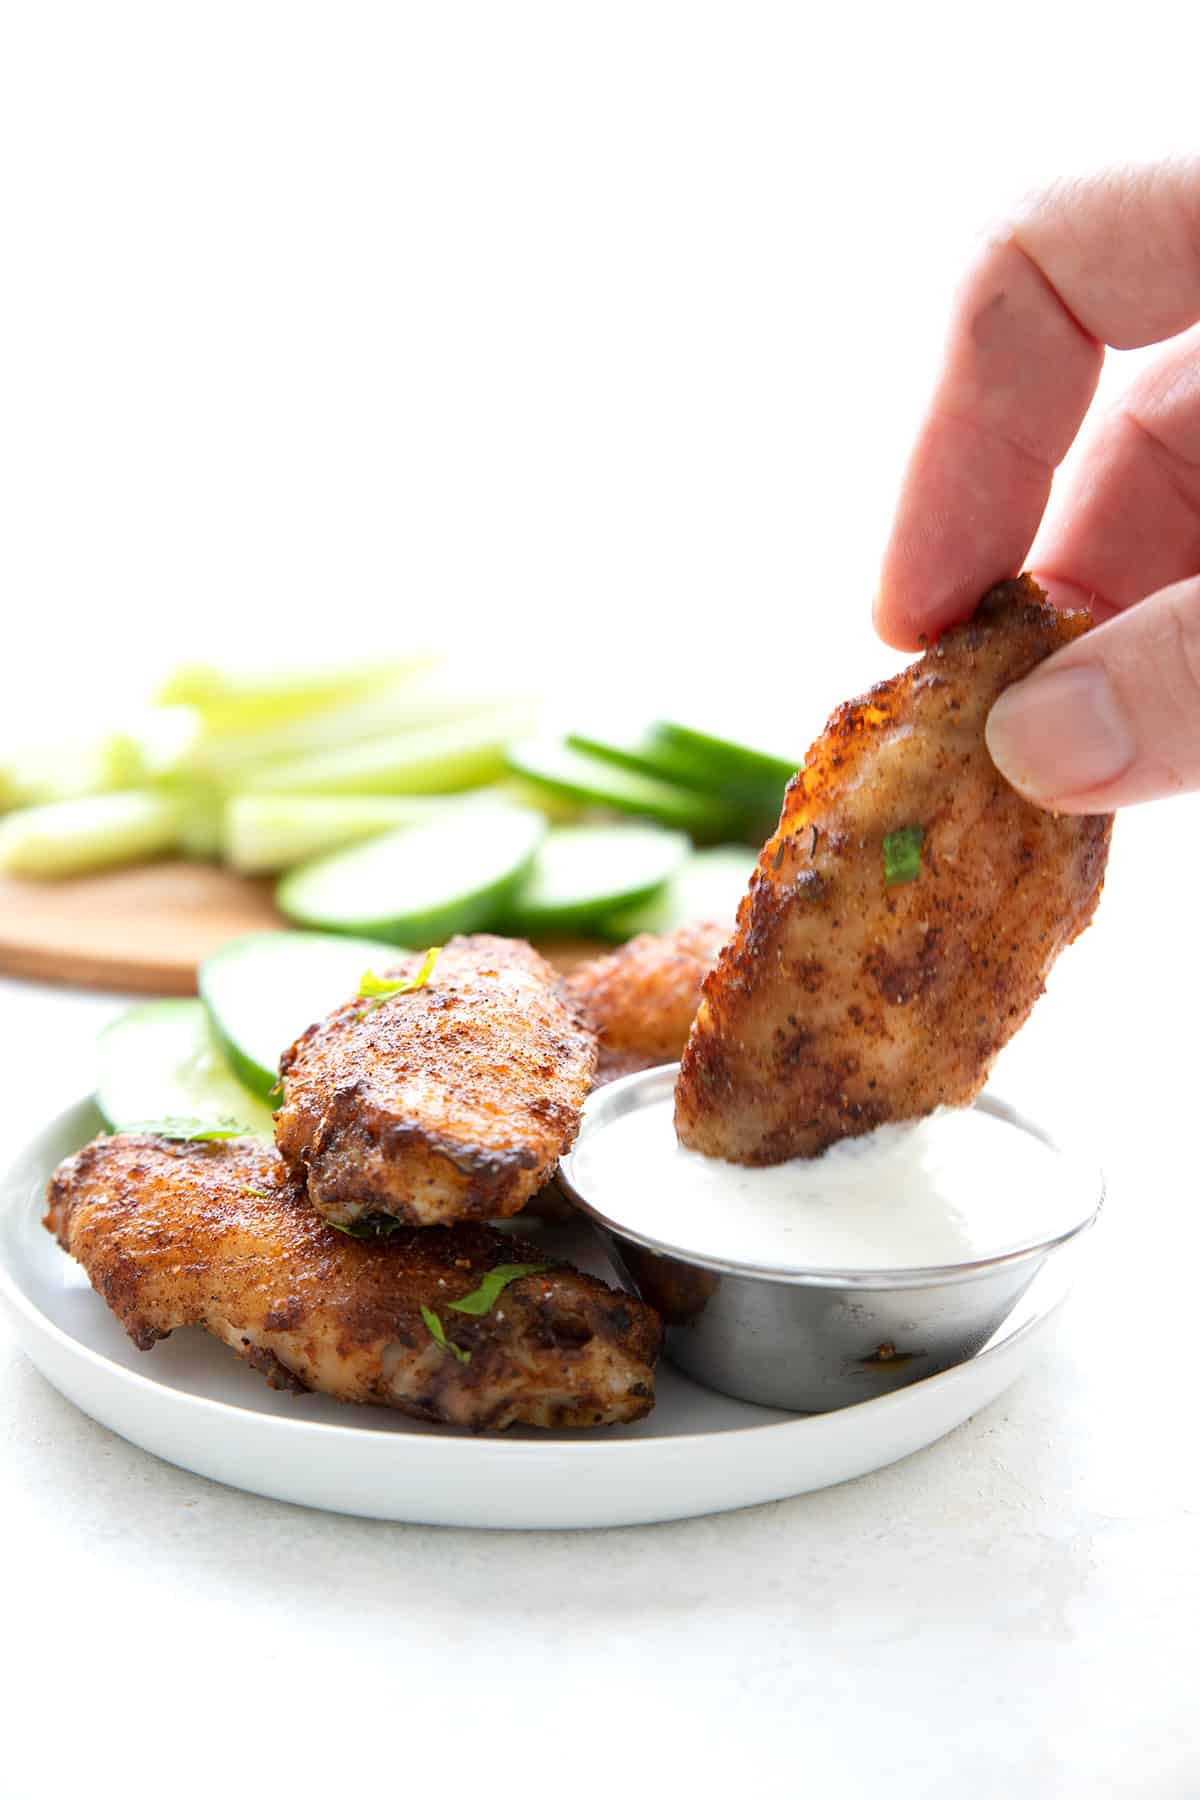 A hand dipping a Cajun wing into ranch dressing.